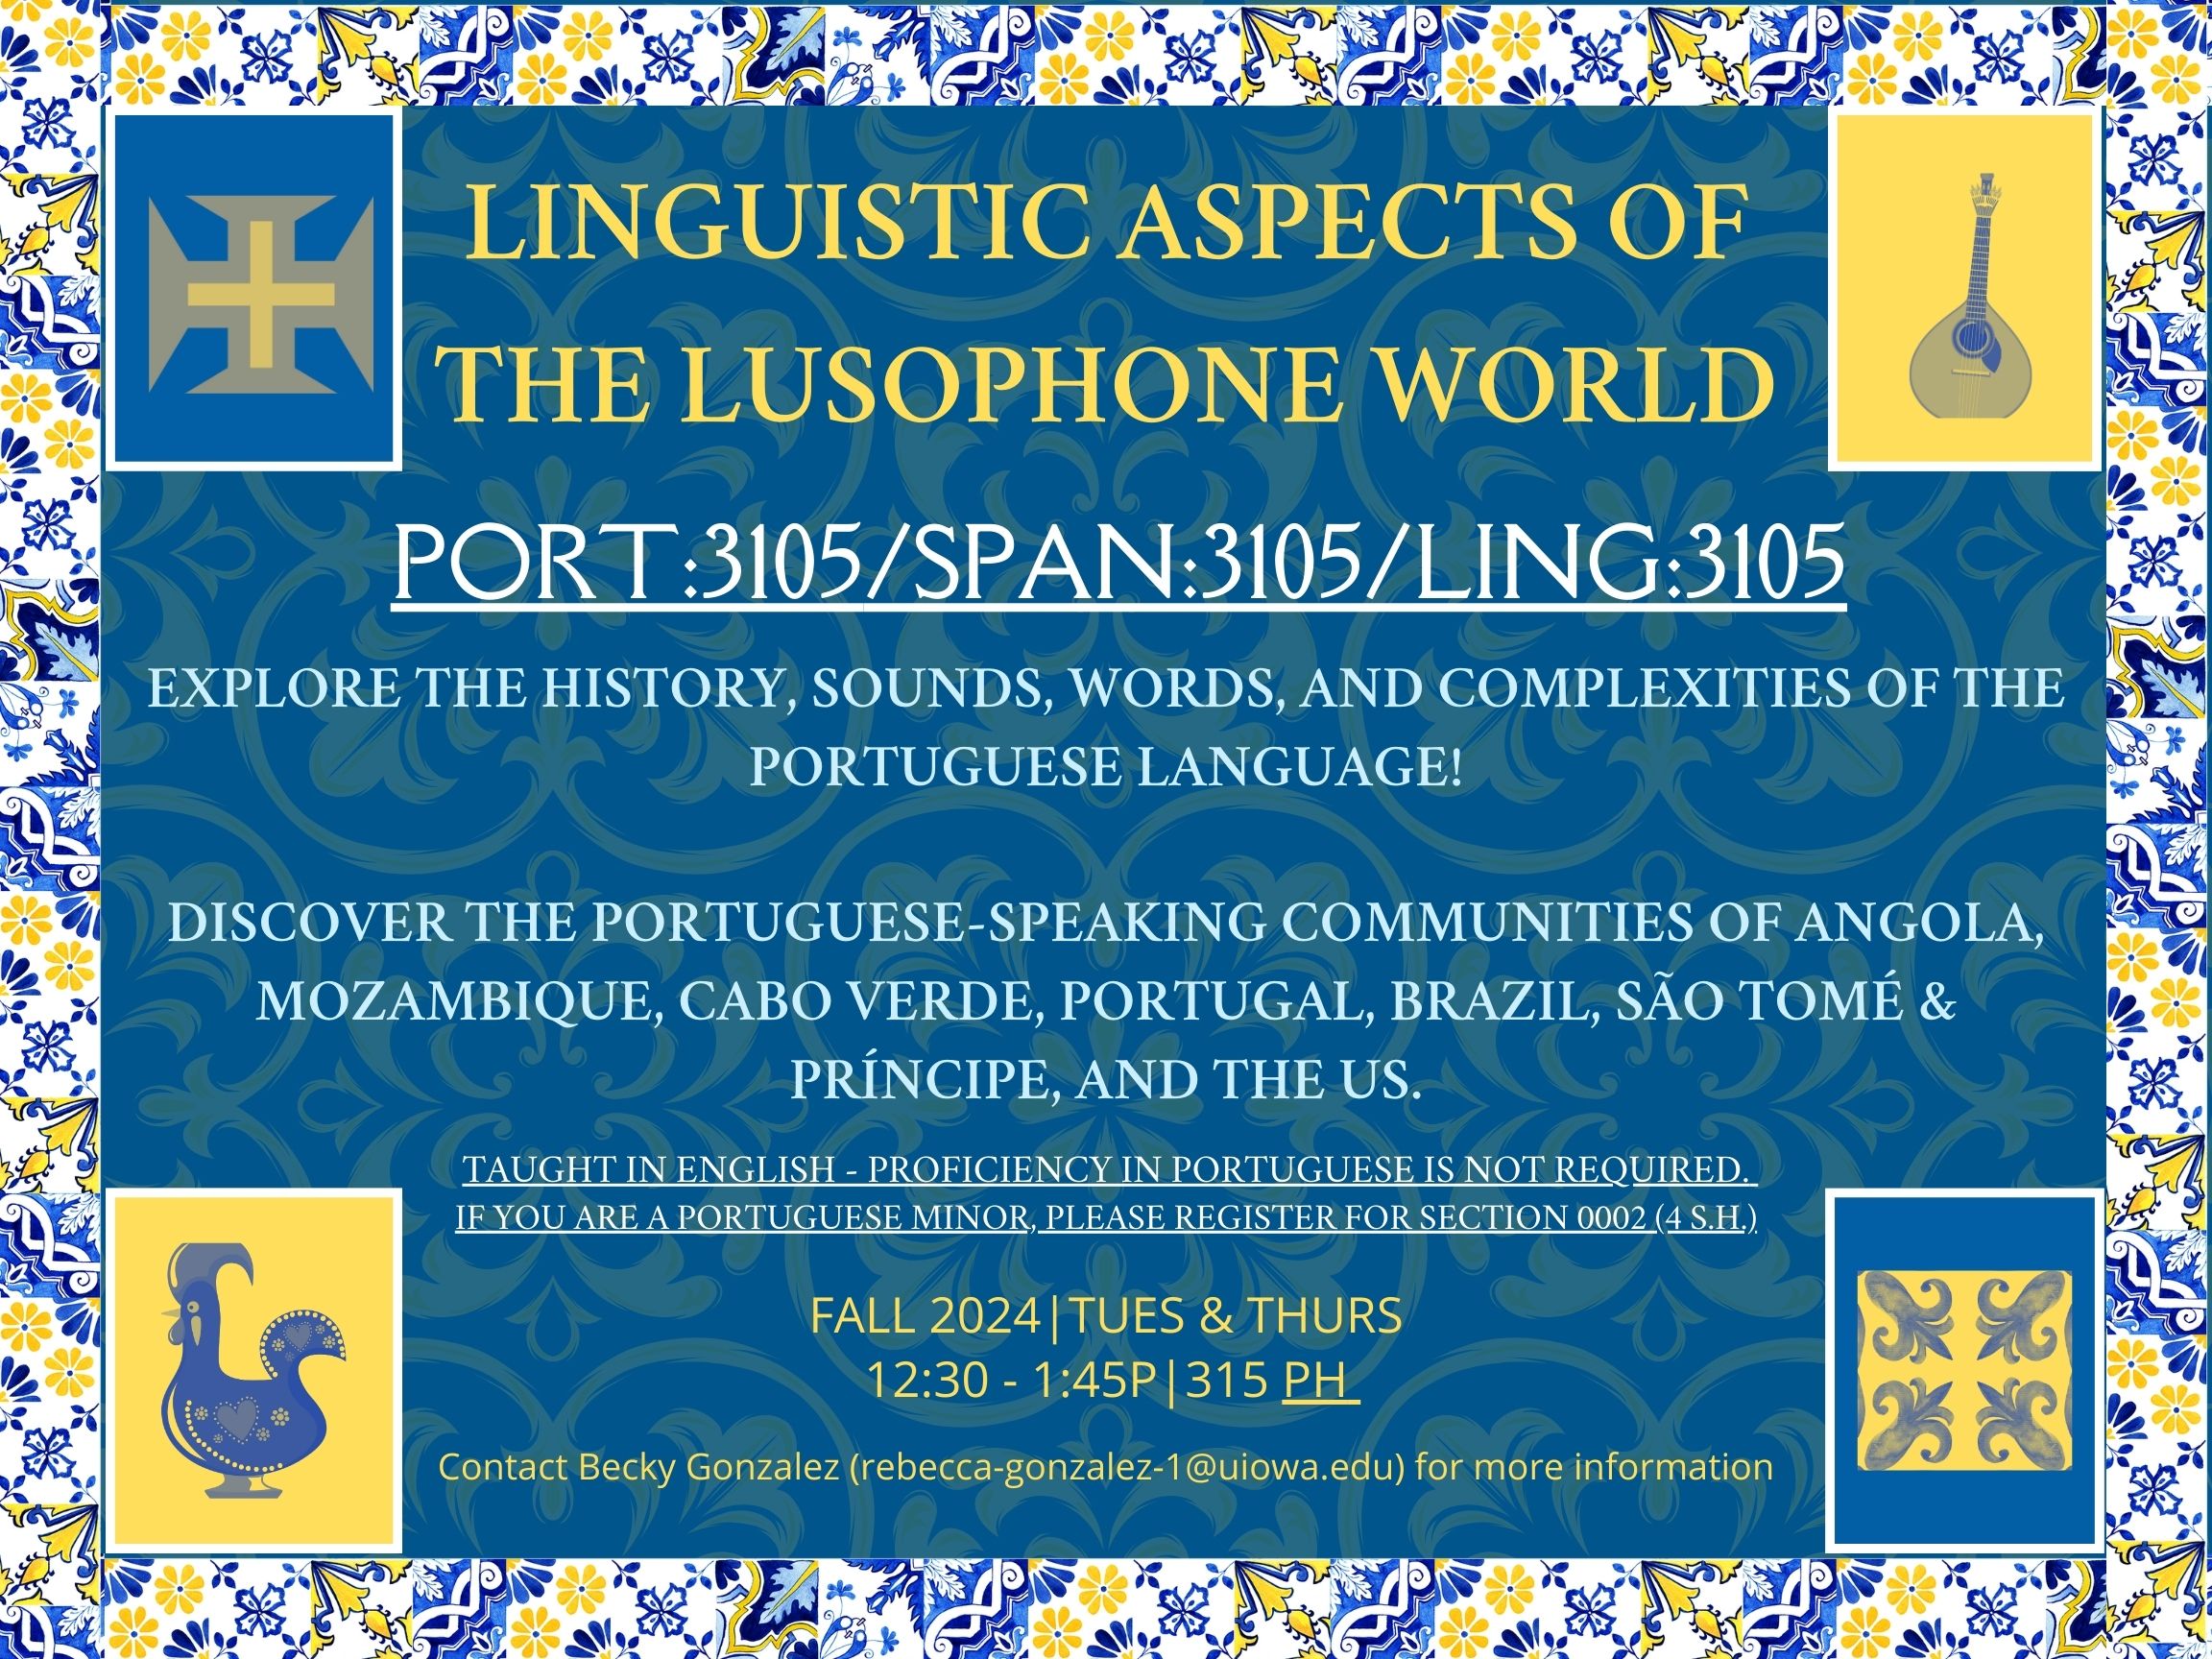 Colorful blue and yellow flyer for a fall 2024 class, Linguistic Aspects of the Lusophone World, course codes PORT 3105, SPAN 3105, or LING 3105. Course is taught in English, so proficiency in Portuguese is not required, though Portuguese minors should register for section 0002 for 4 semester hours. It is taught on Tuesdays and Thursdays from 12:30-1:45 PM in 315 Phillips Hall. Contact Becky Gonzalez at rebecca-gonzalez-1@uiowa.edu for more information. Course blurbs read: Explore the history, sounds, words, and complexities of the Portuguese language! Discover the Portuguese-speaking communities of Angola, Mozambique, Cabo Verde, Portugal, Brazil, Sao Tome & Principe, and the United States.